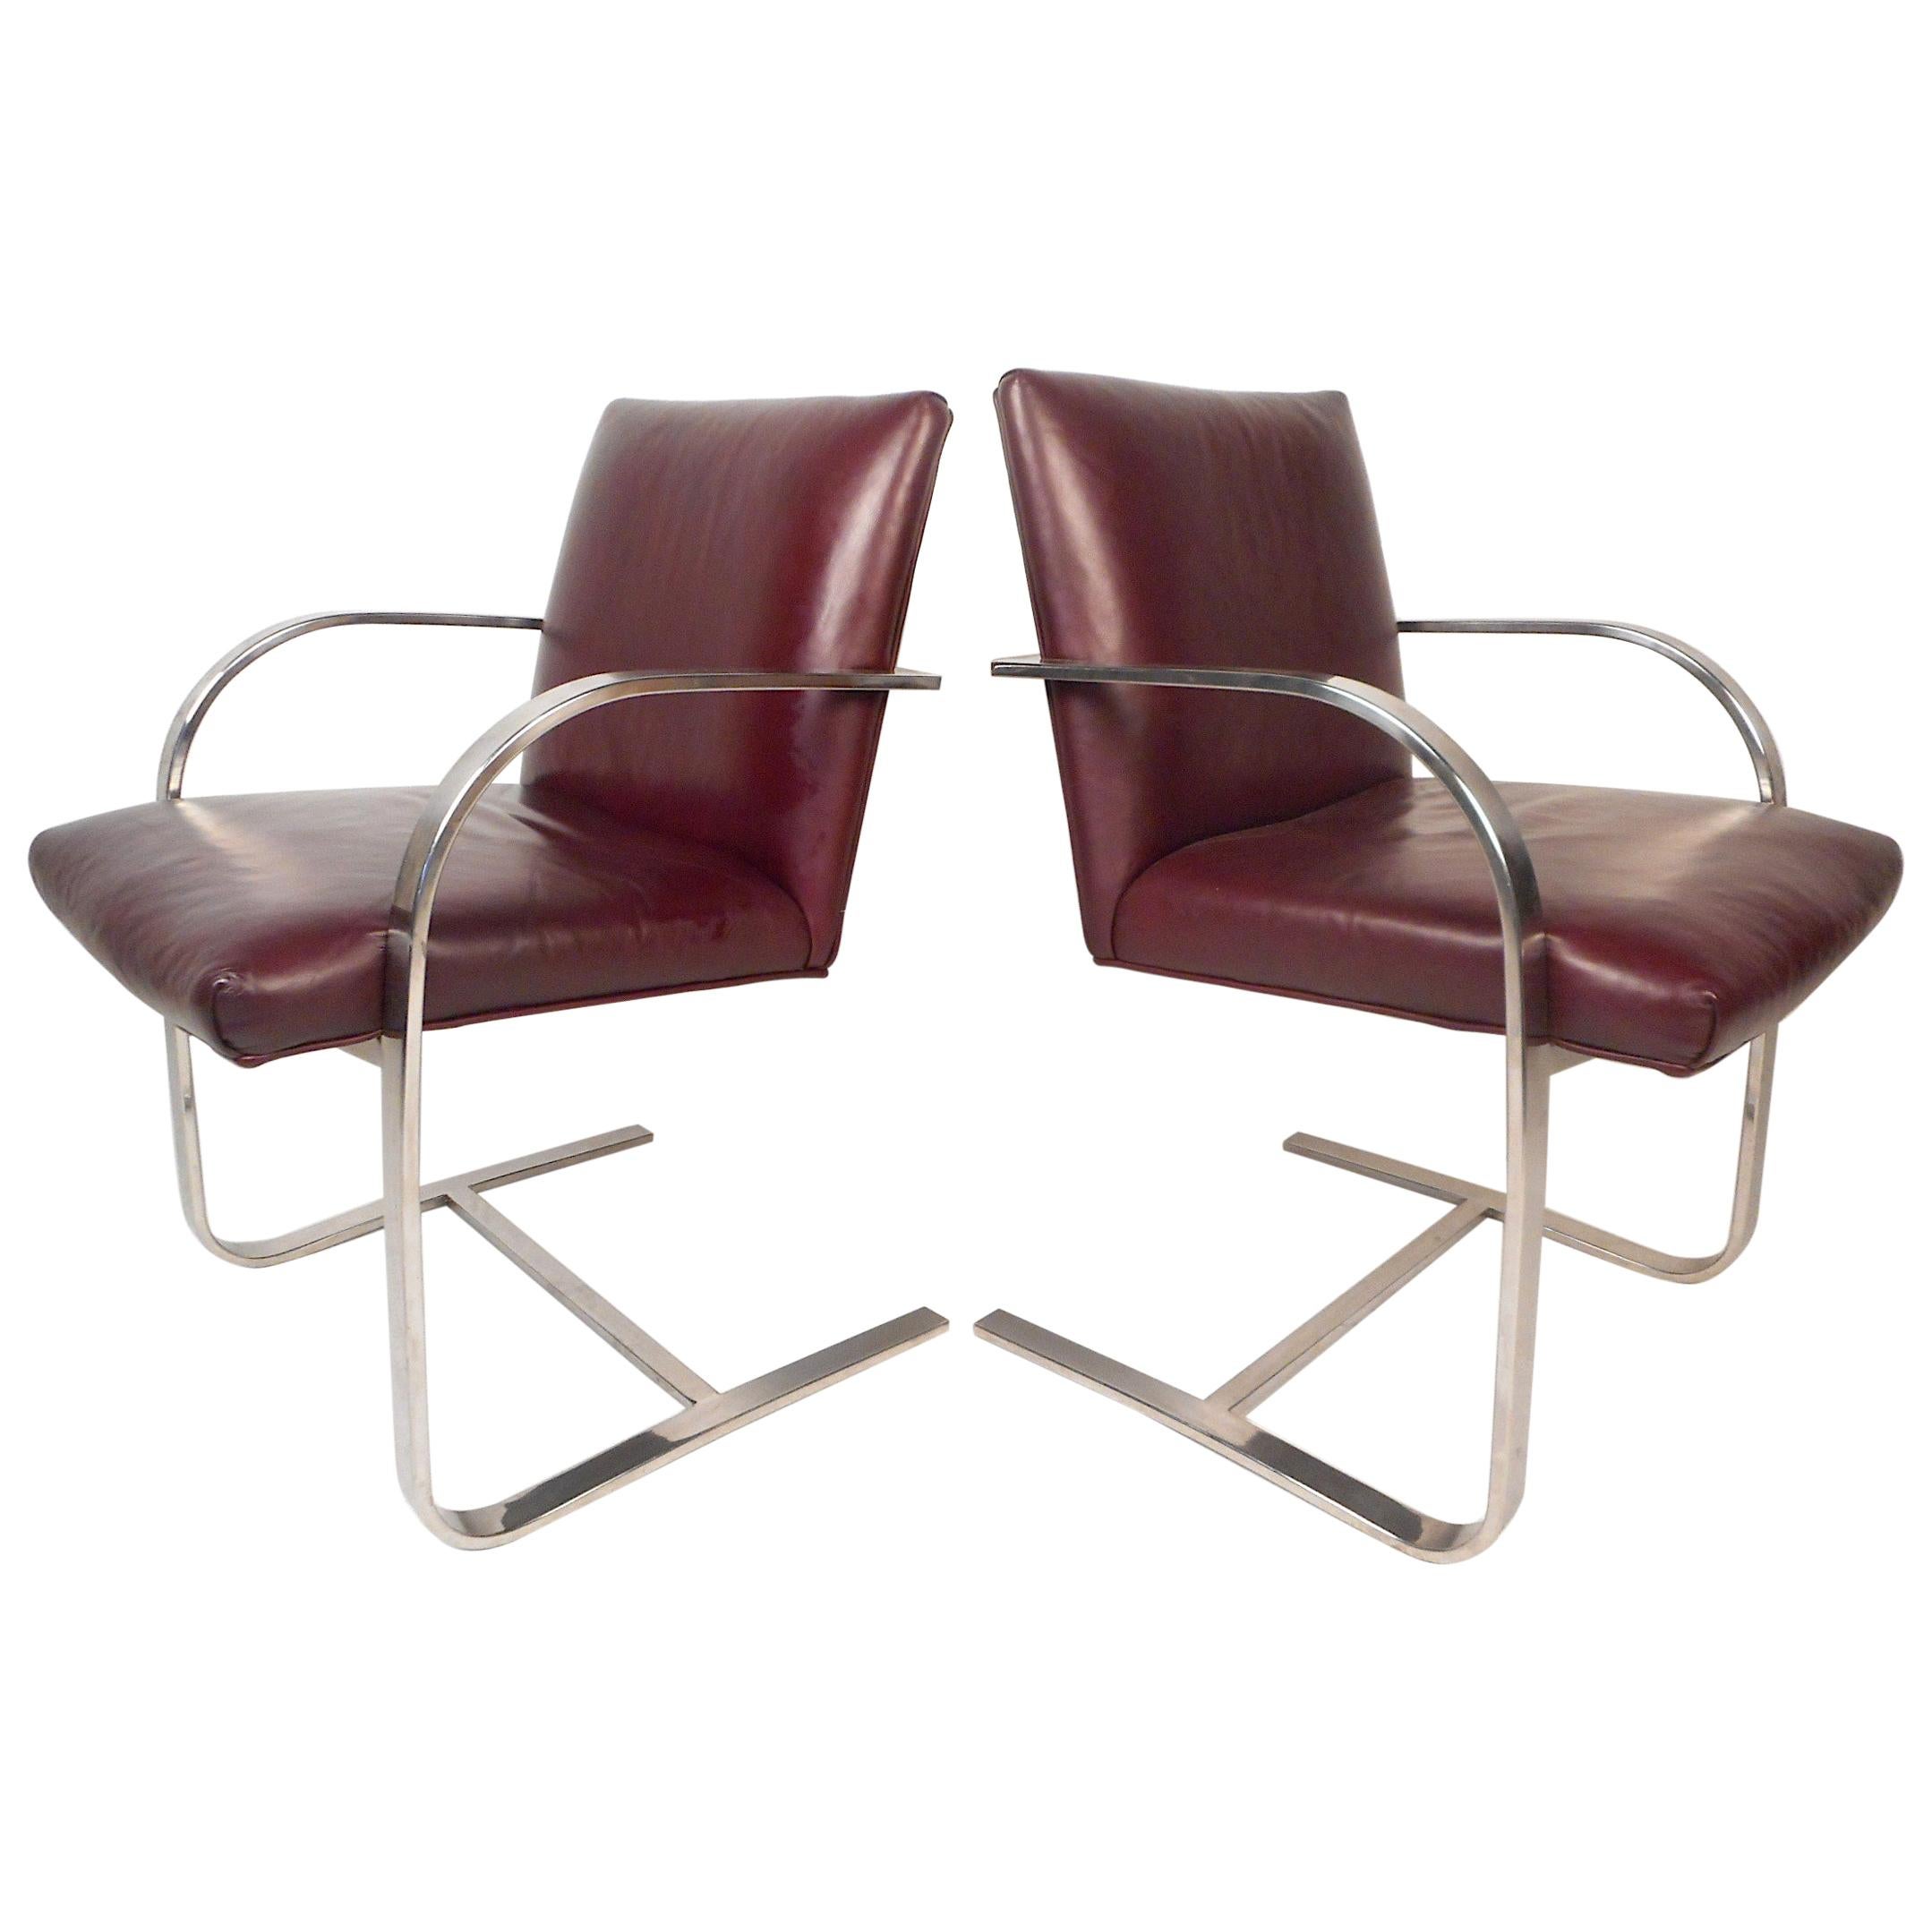 Pair of Mid-Century Cantilever Chairs